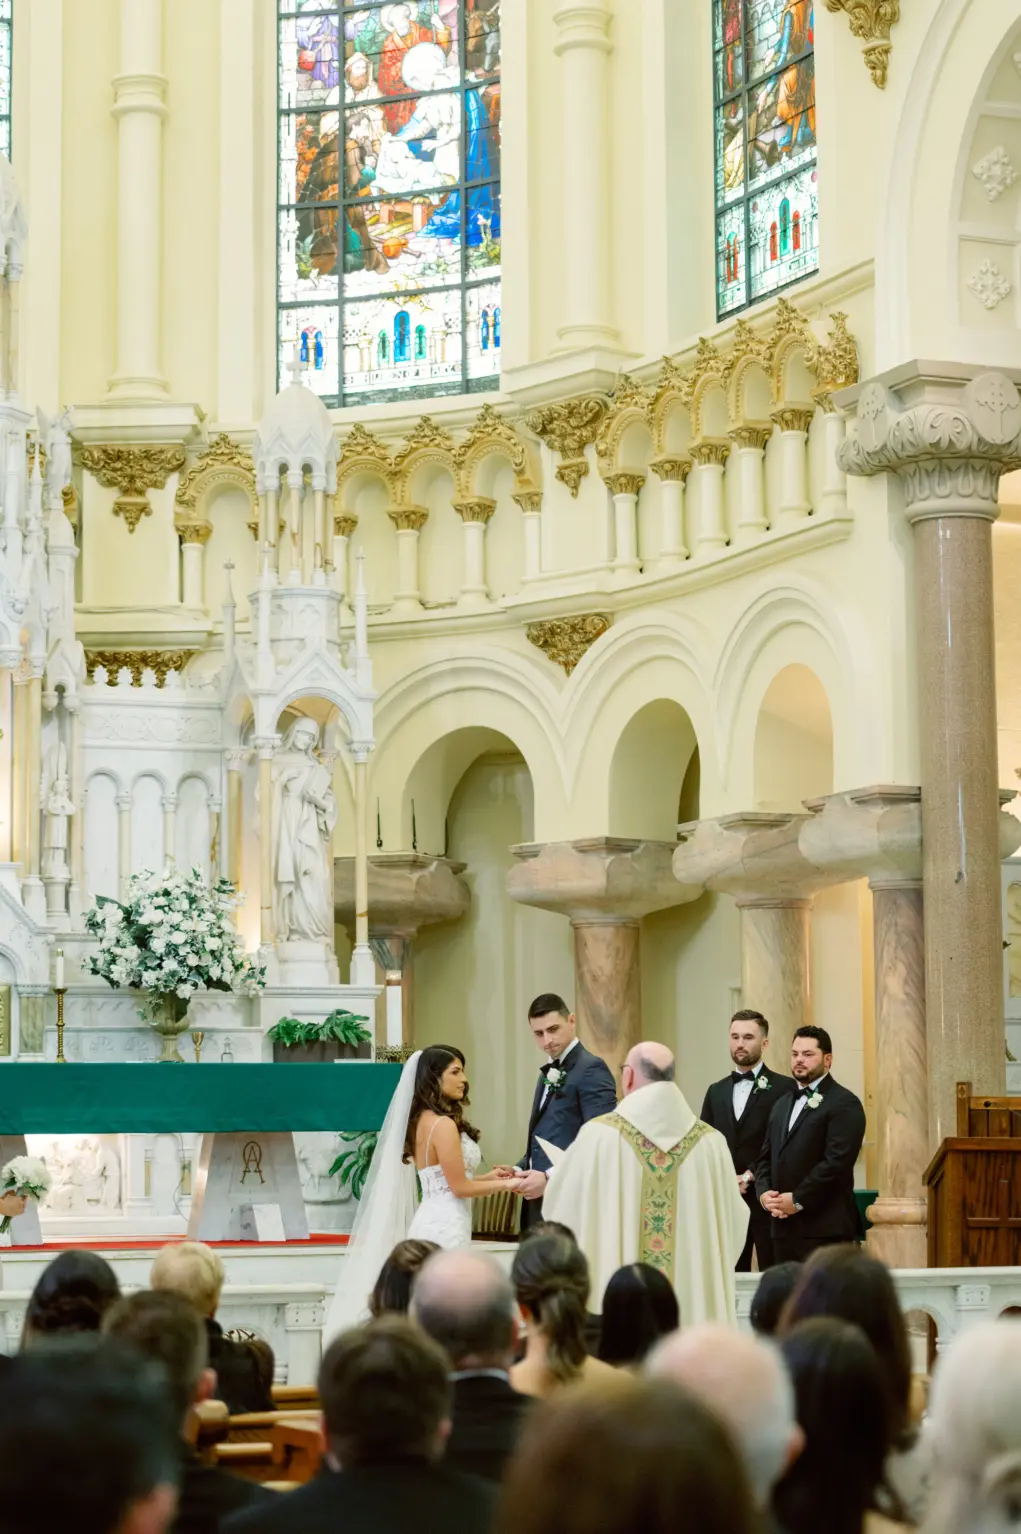 Bride and Groom Classic Traditional Religious Catholic Wedding Ceremony Ideas | Downtown Tampa Sacred Heart Catholic Church Venue